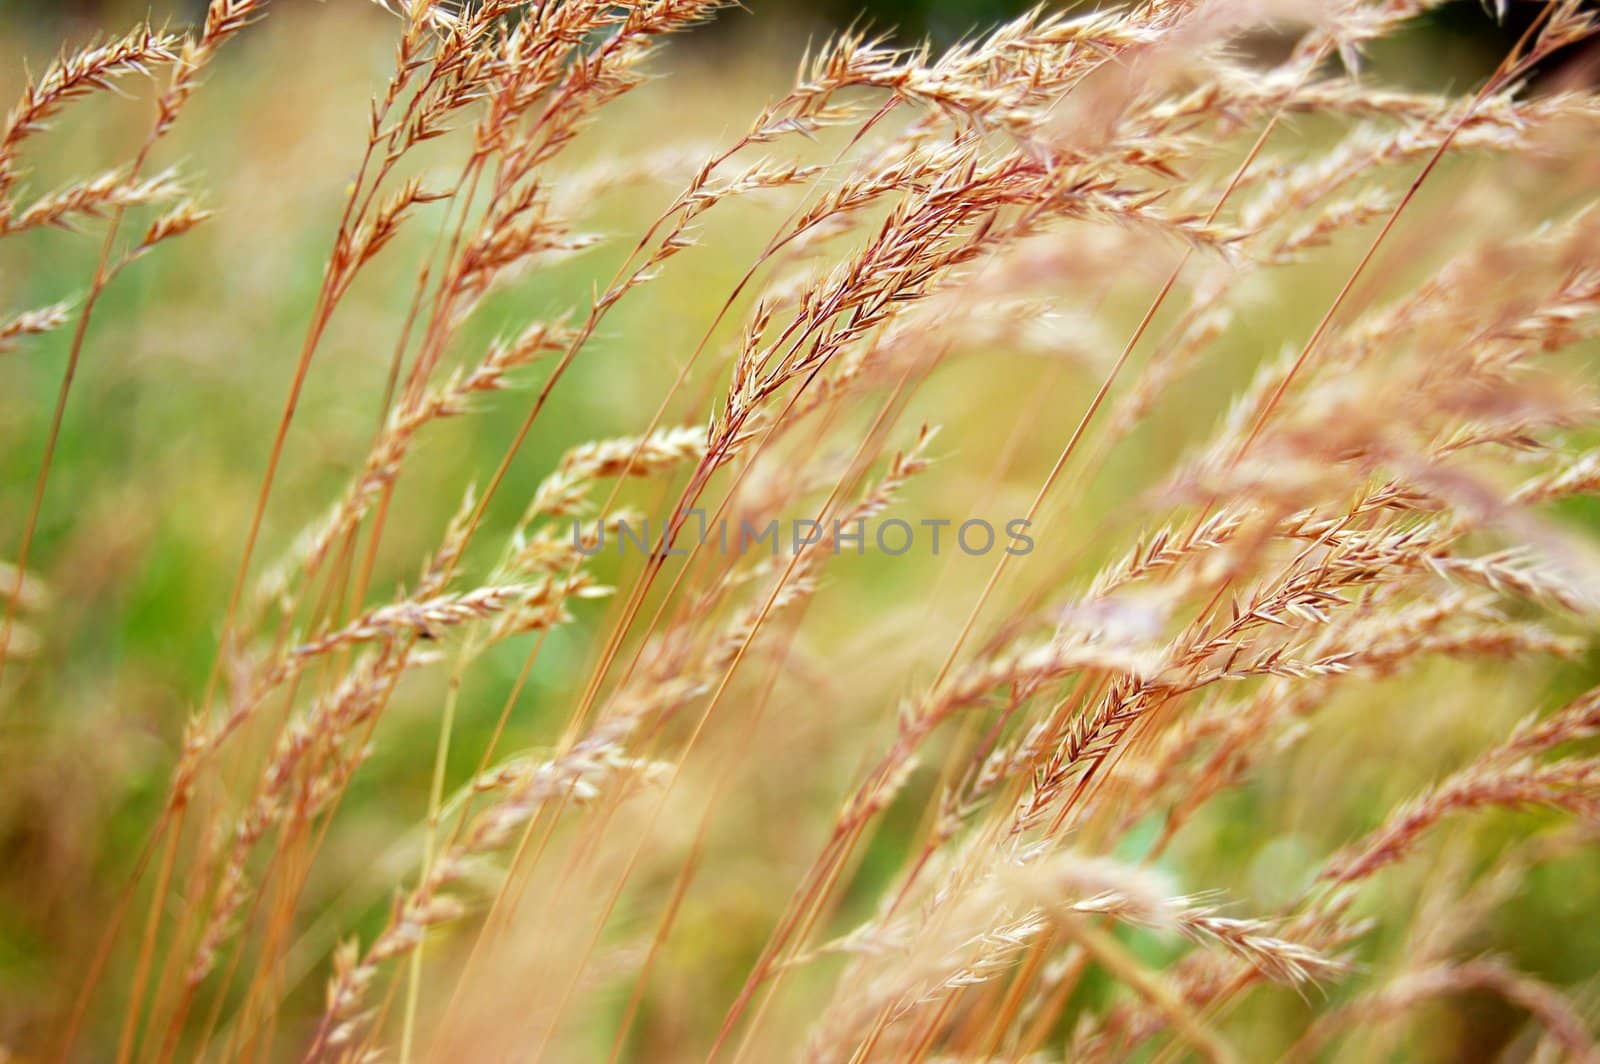 some wild weeds as background